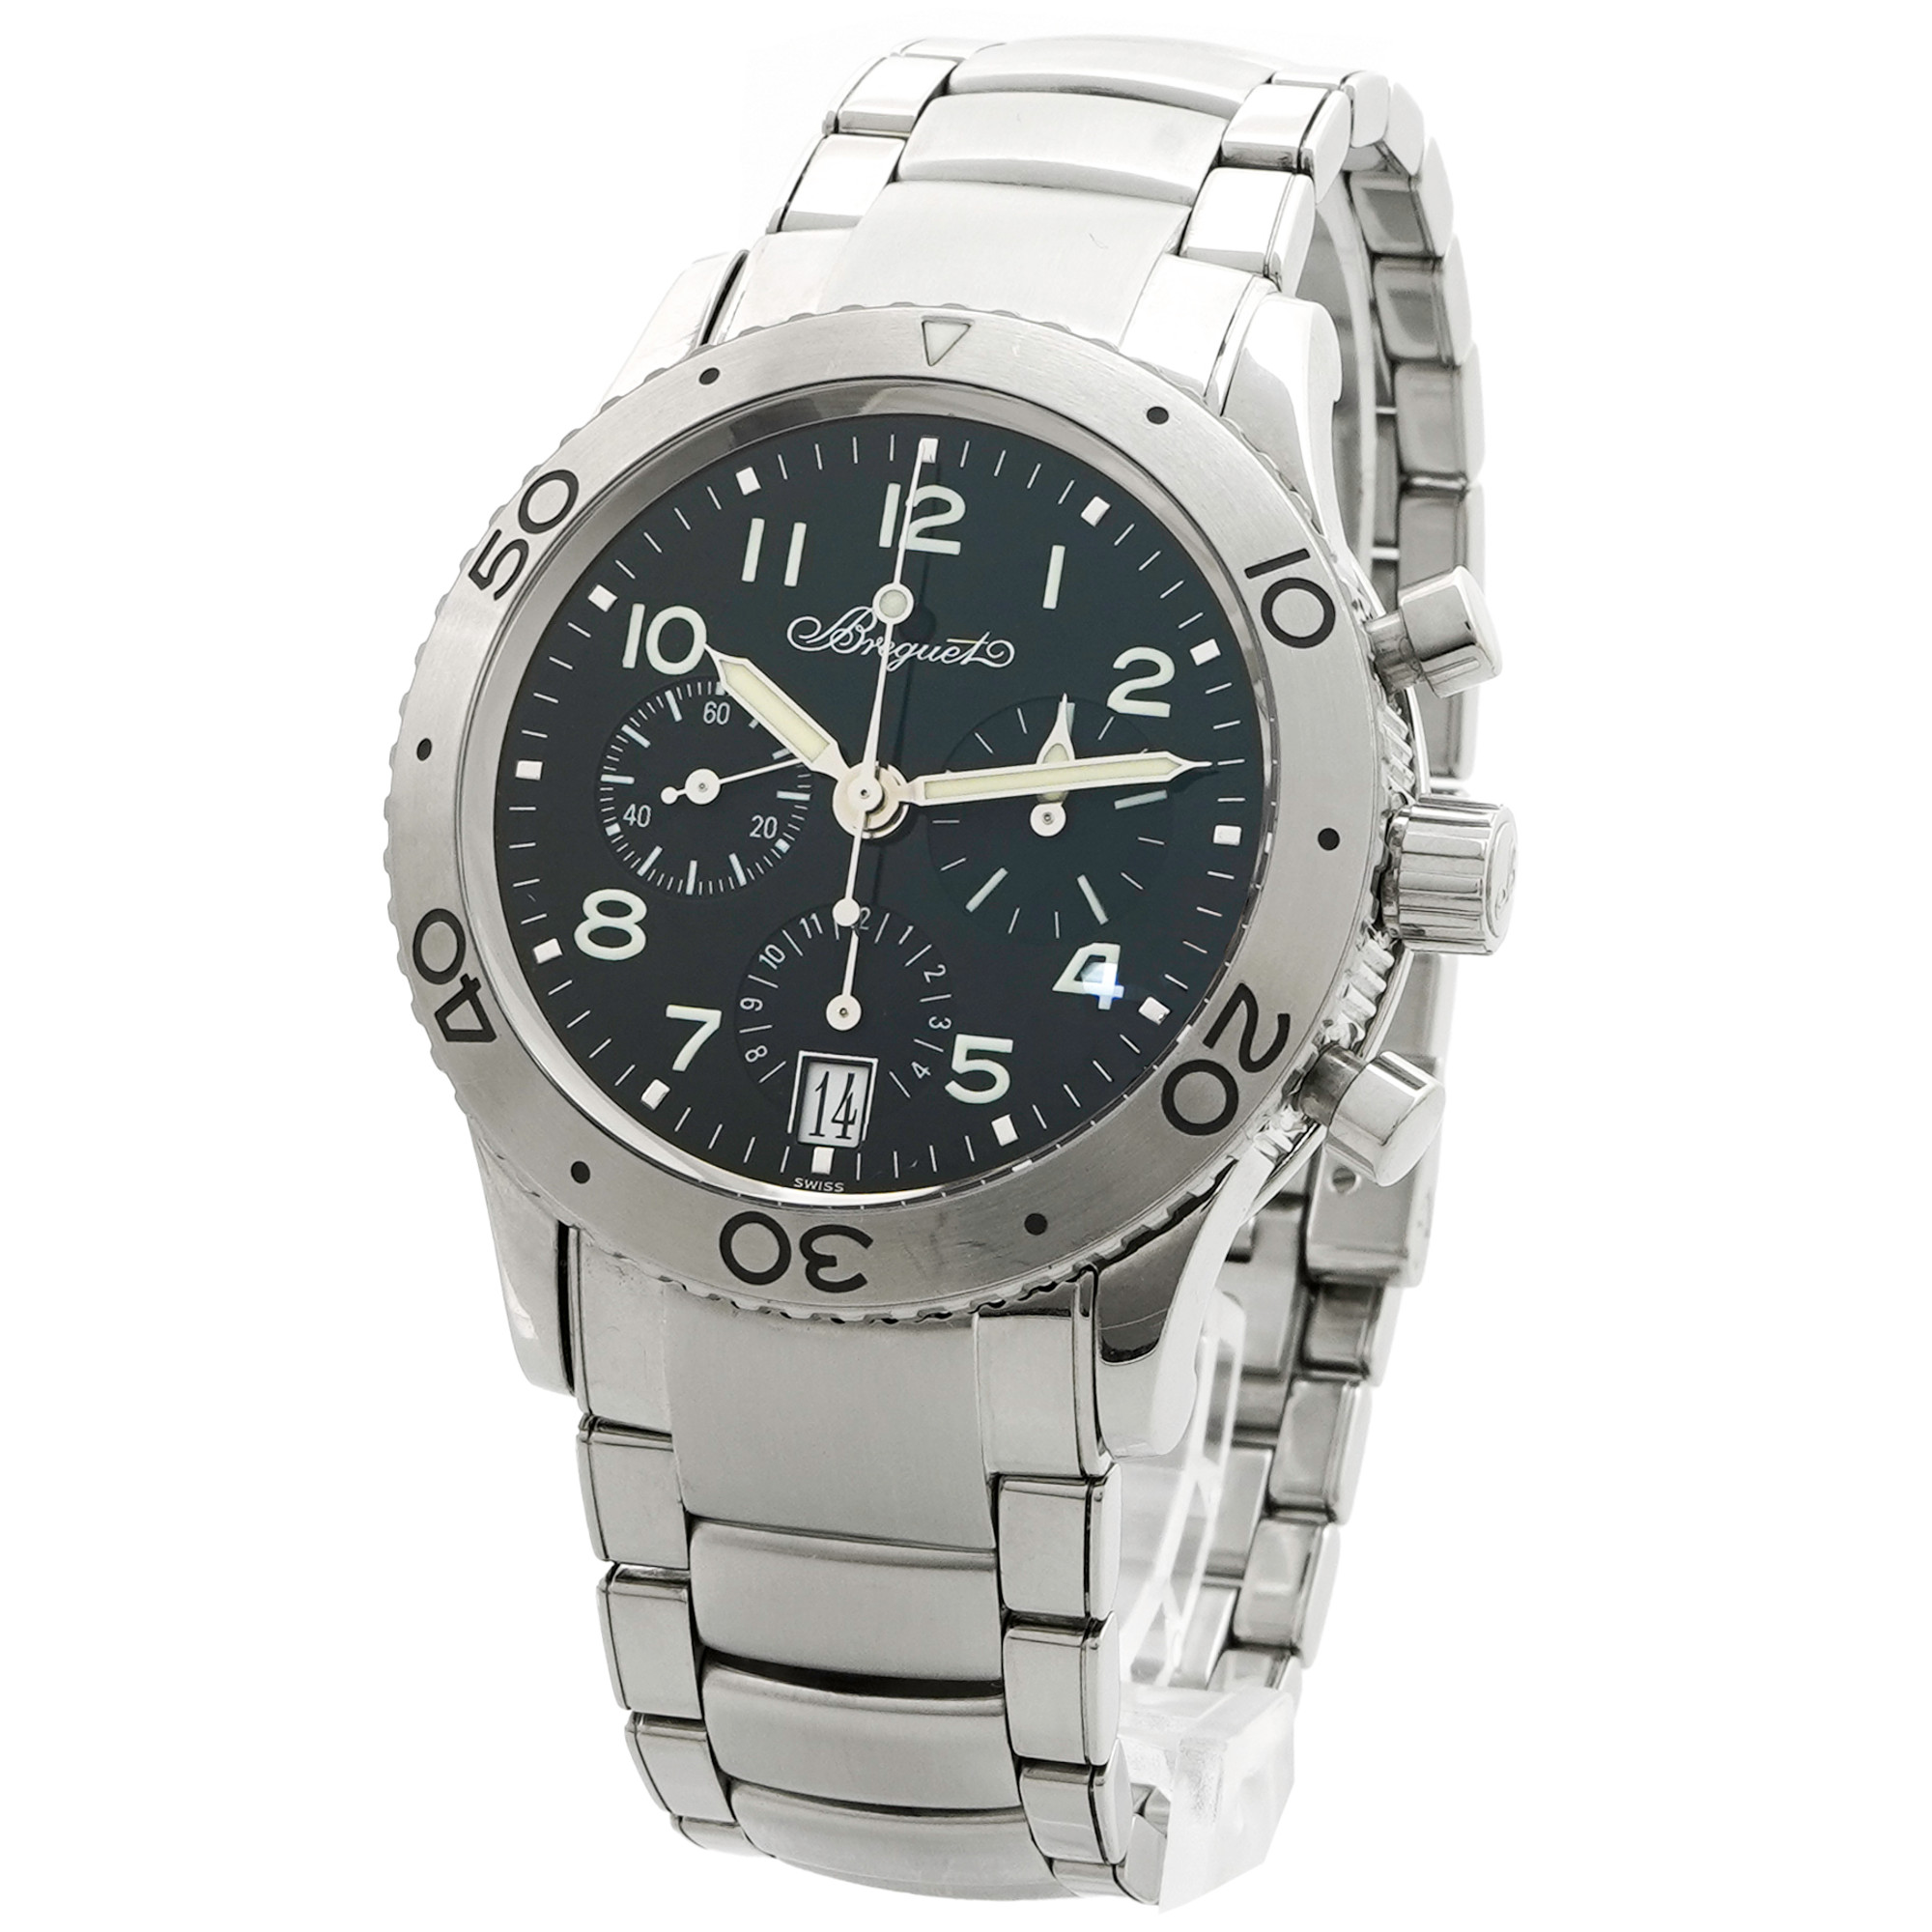 Breguet Type XX Flyback Chronograph 3820 - Inventory 4623